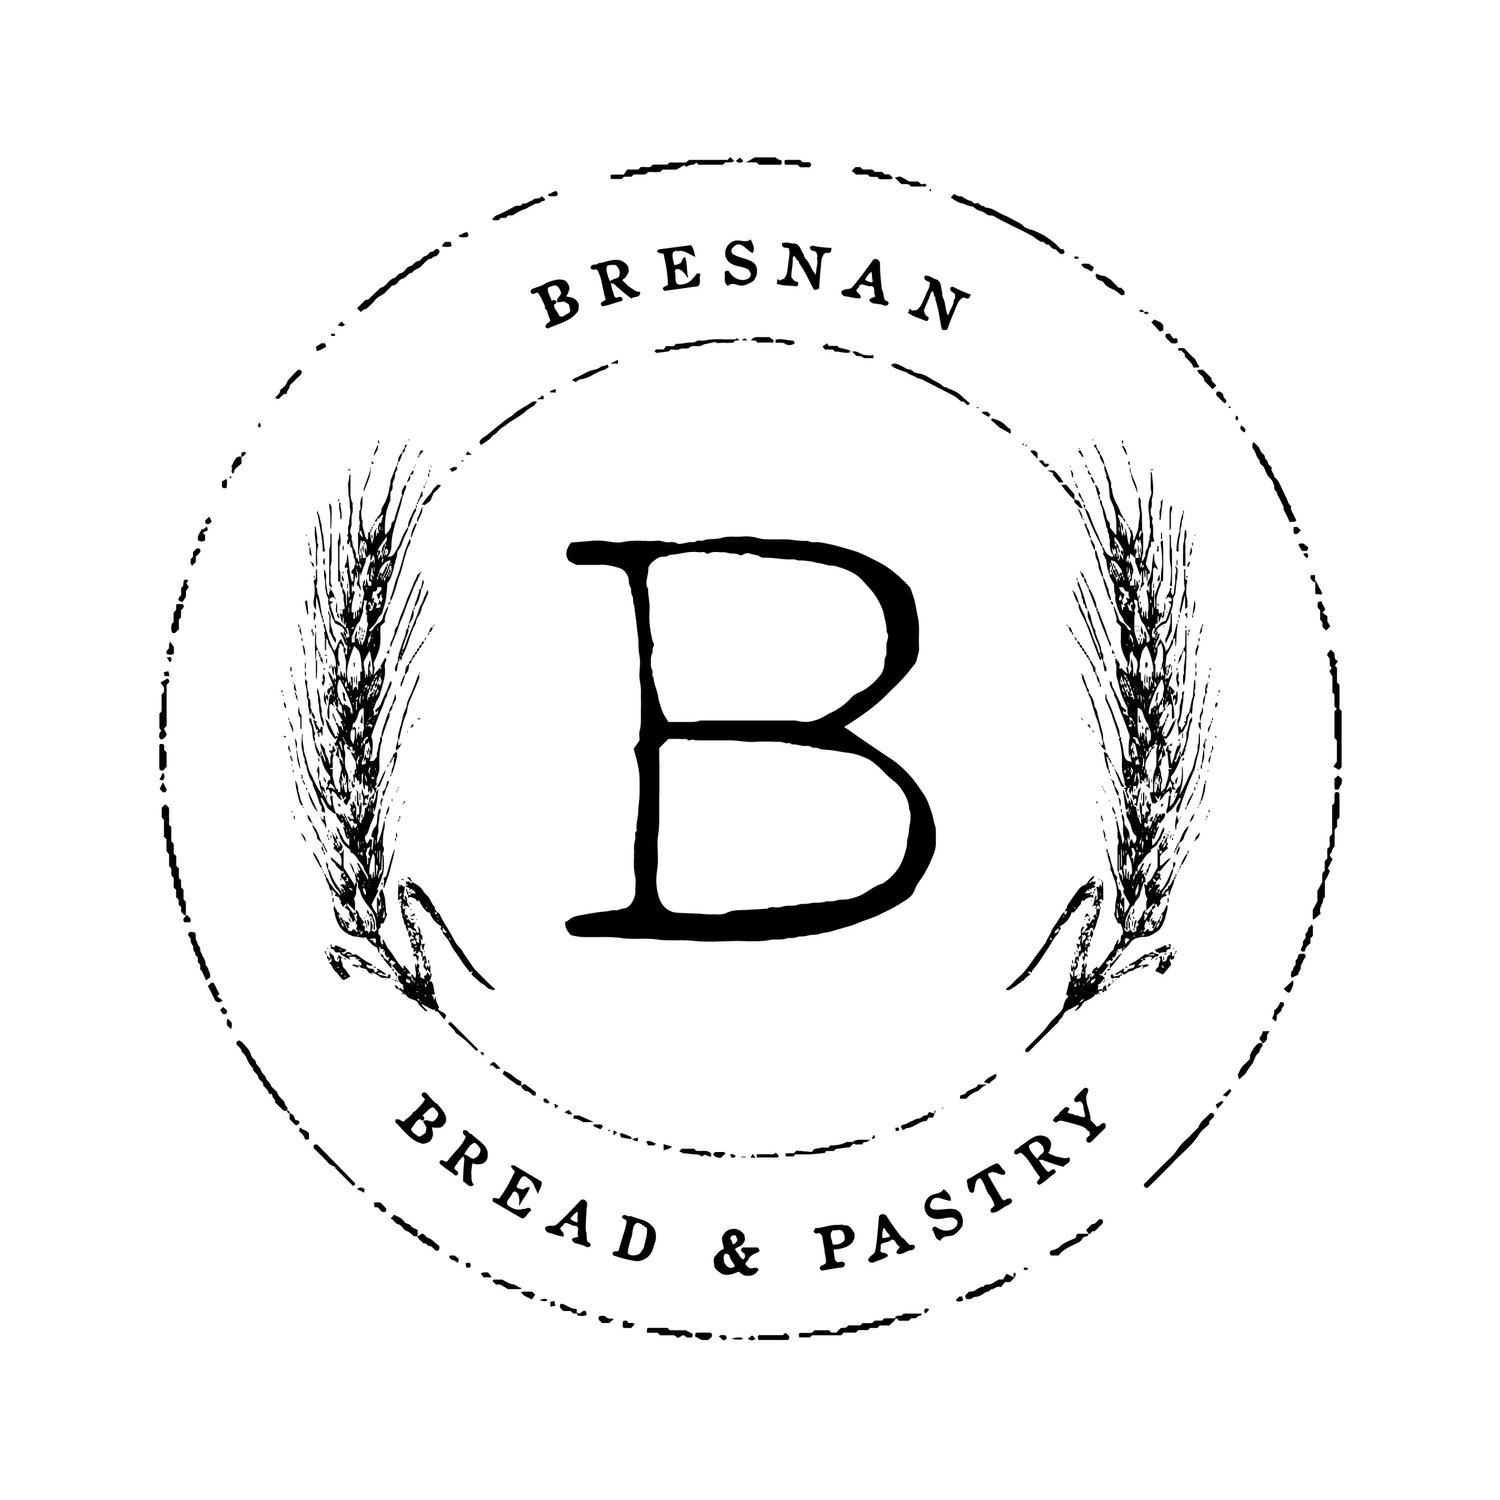 Bresnan Bread and Pastry